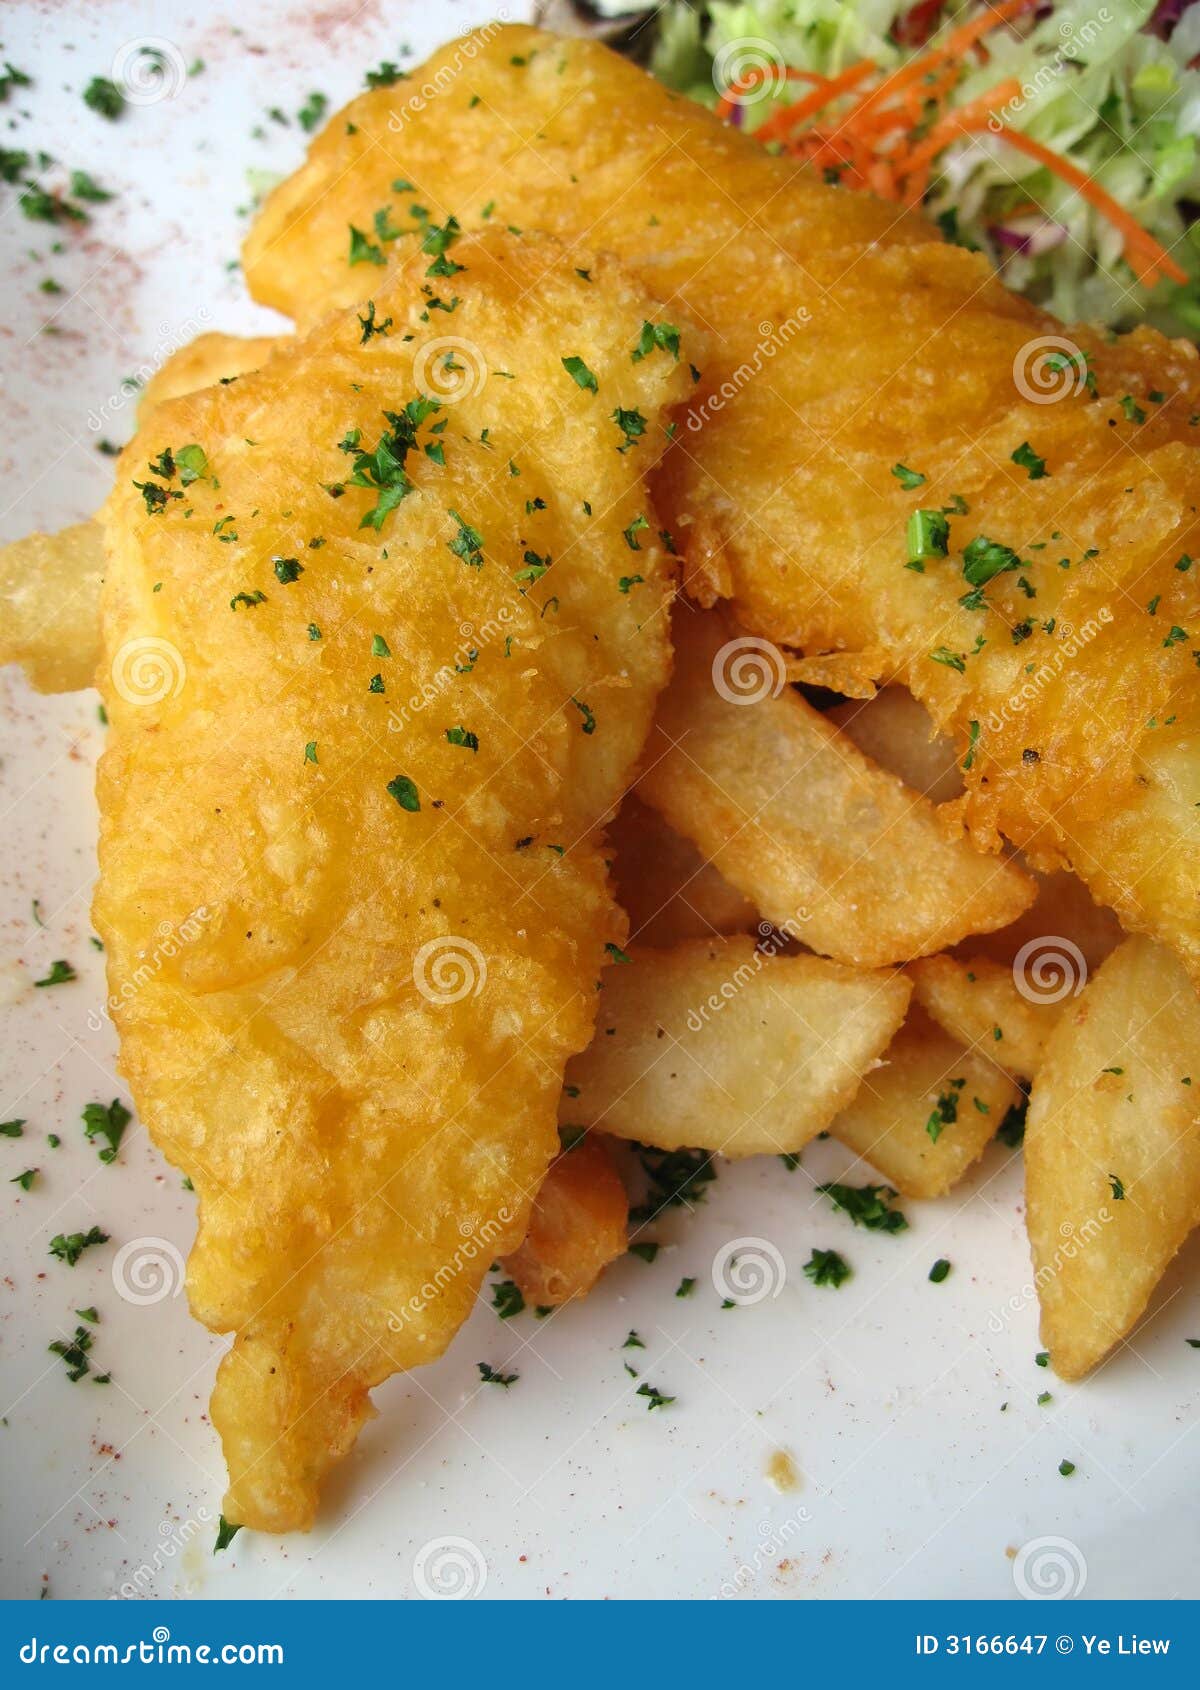 free clipart fish and chips - photo #49